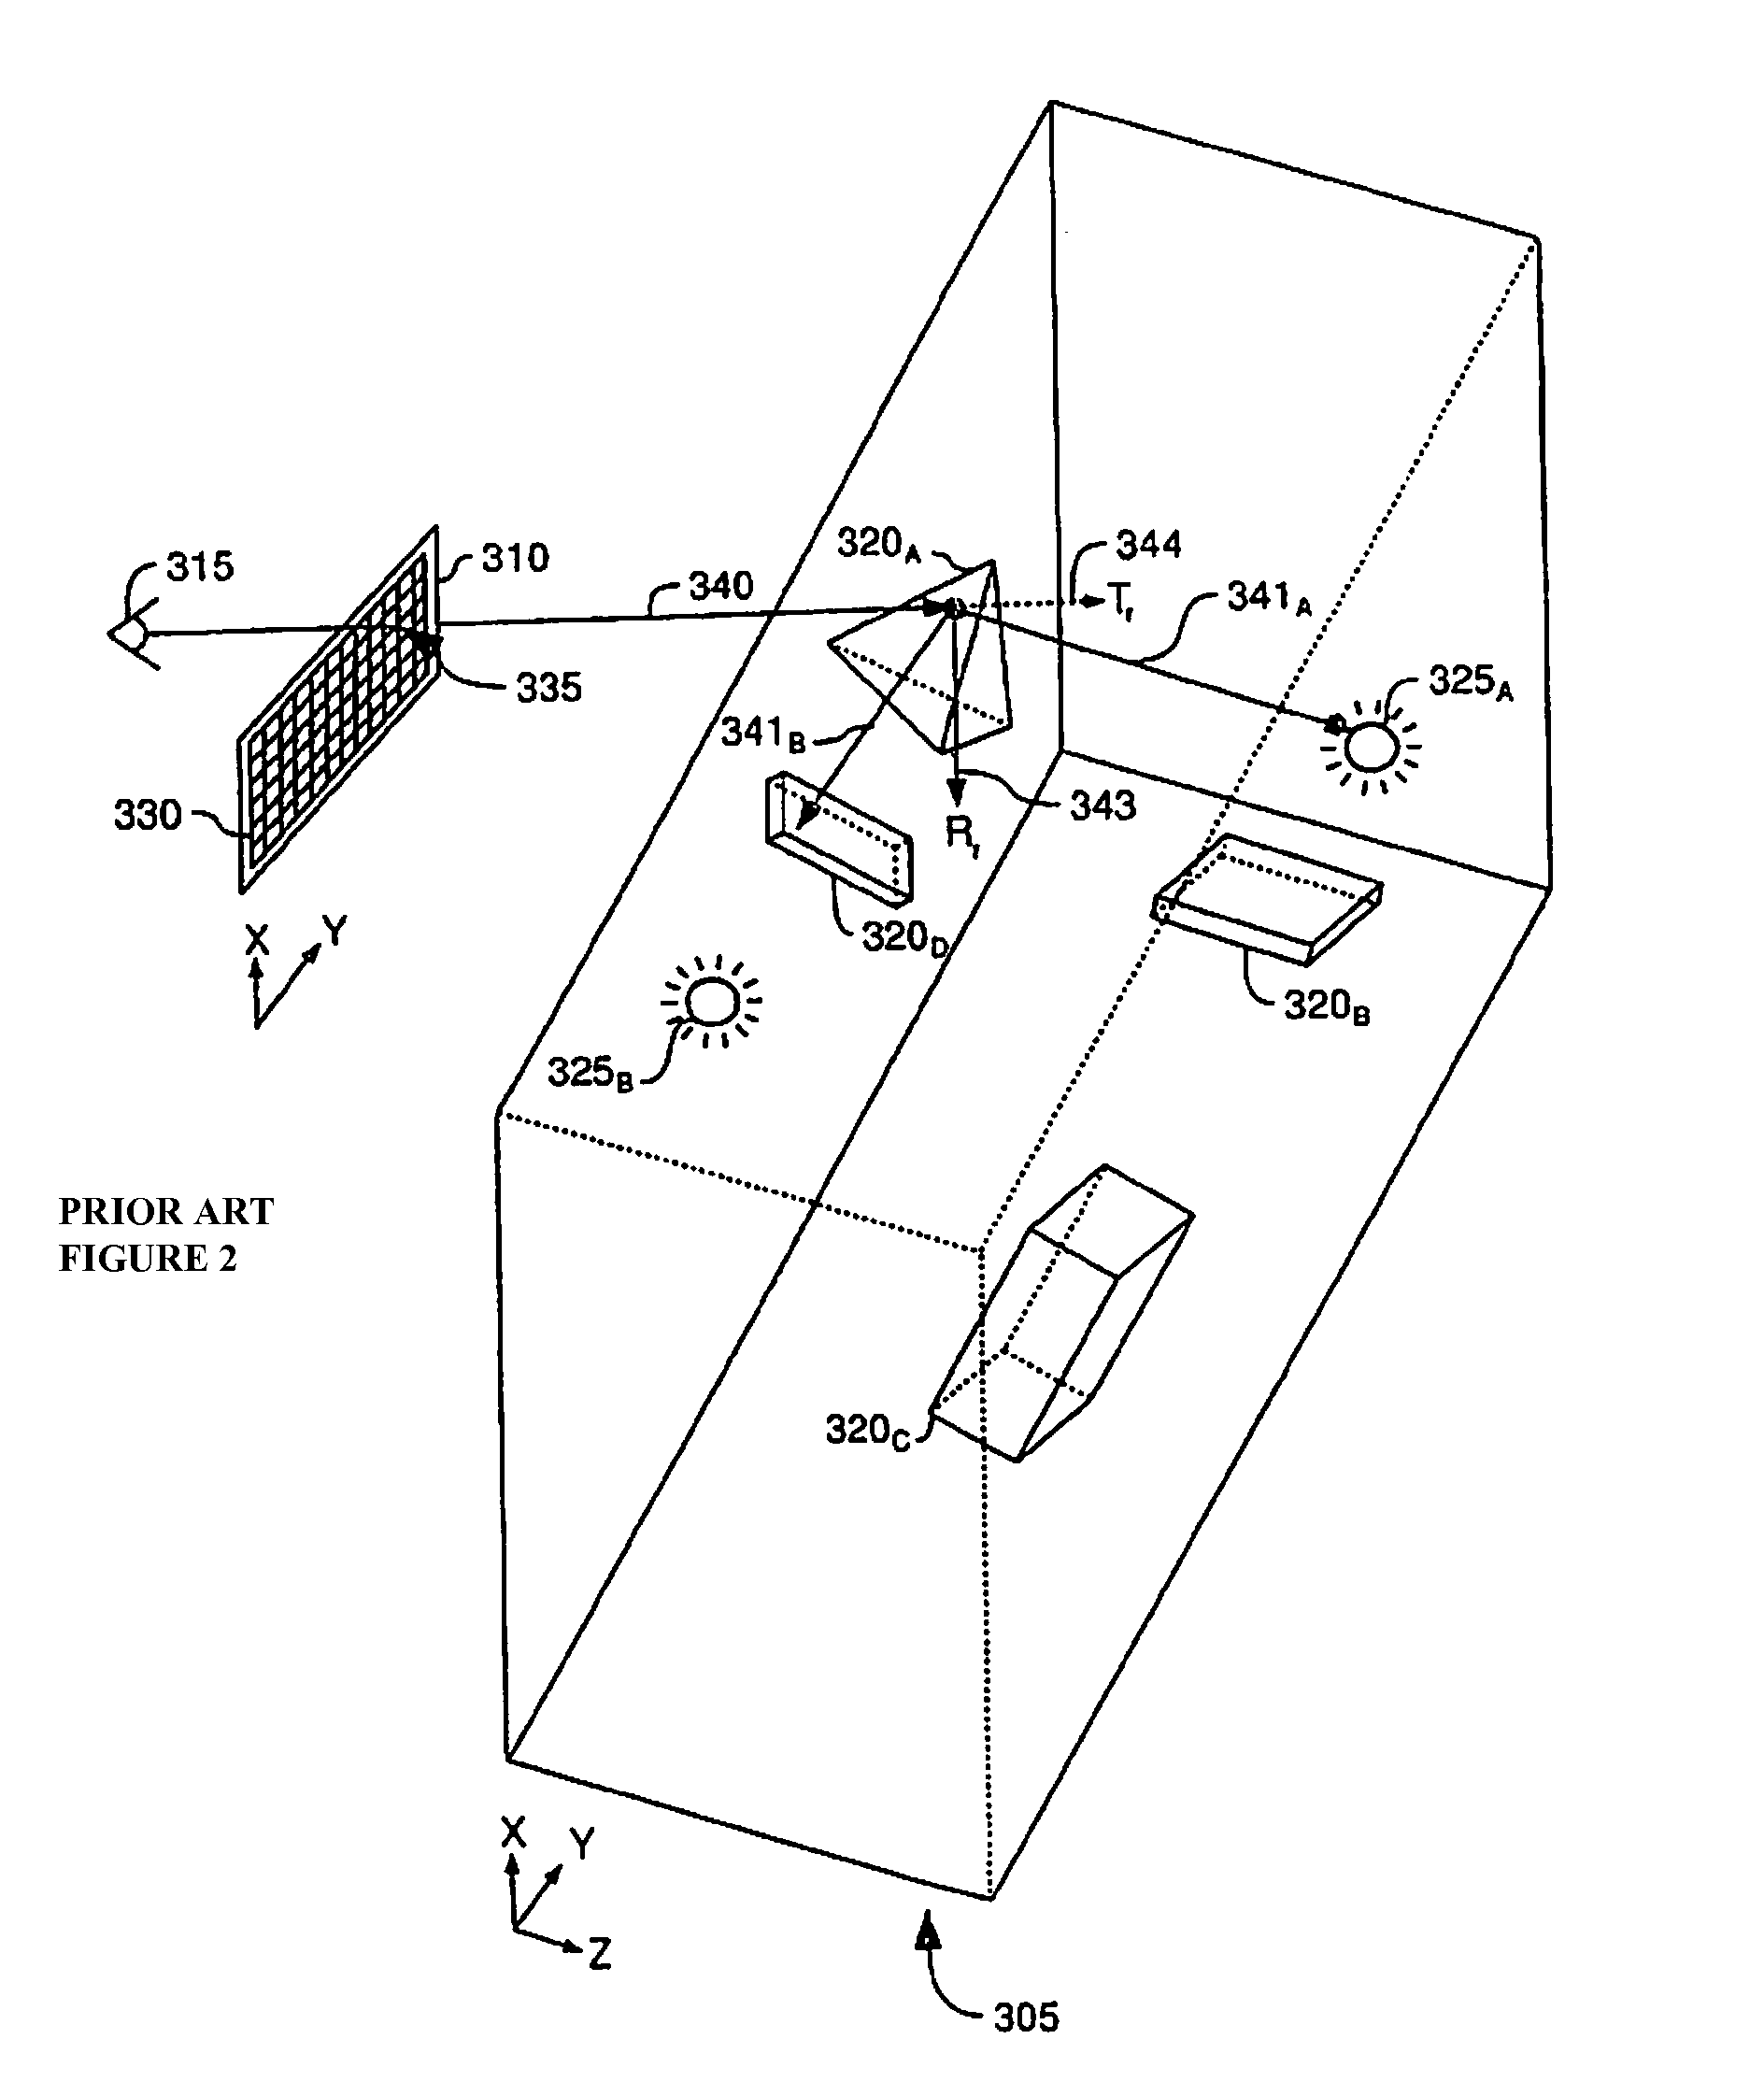 Lines-of-sight and viewsheds determination system